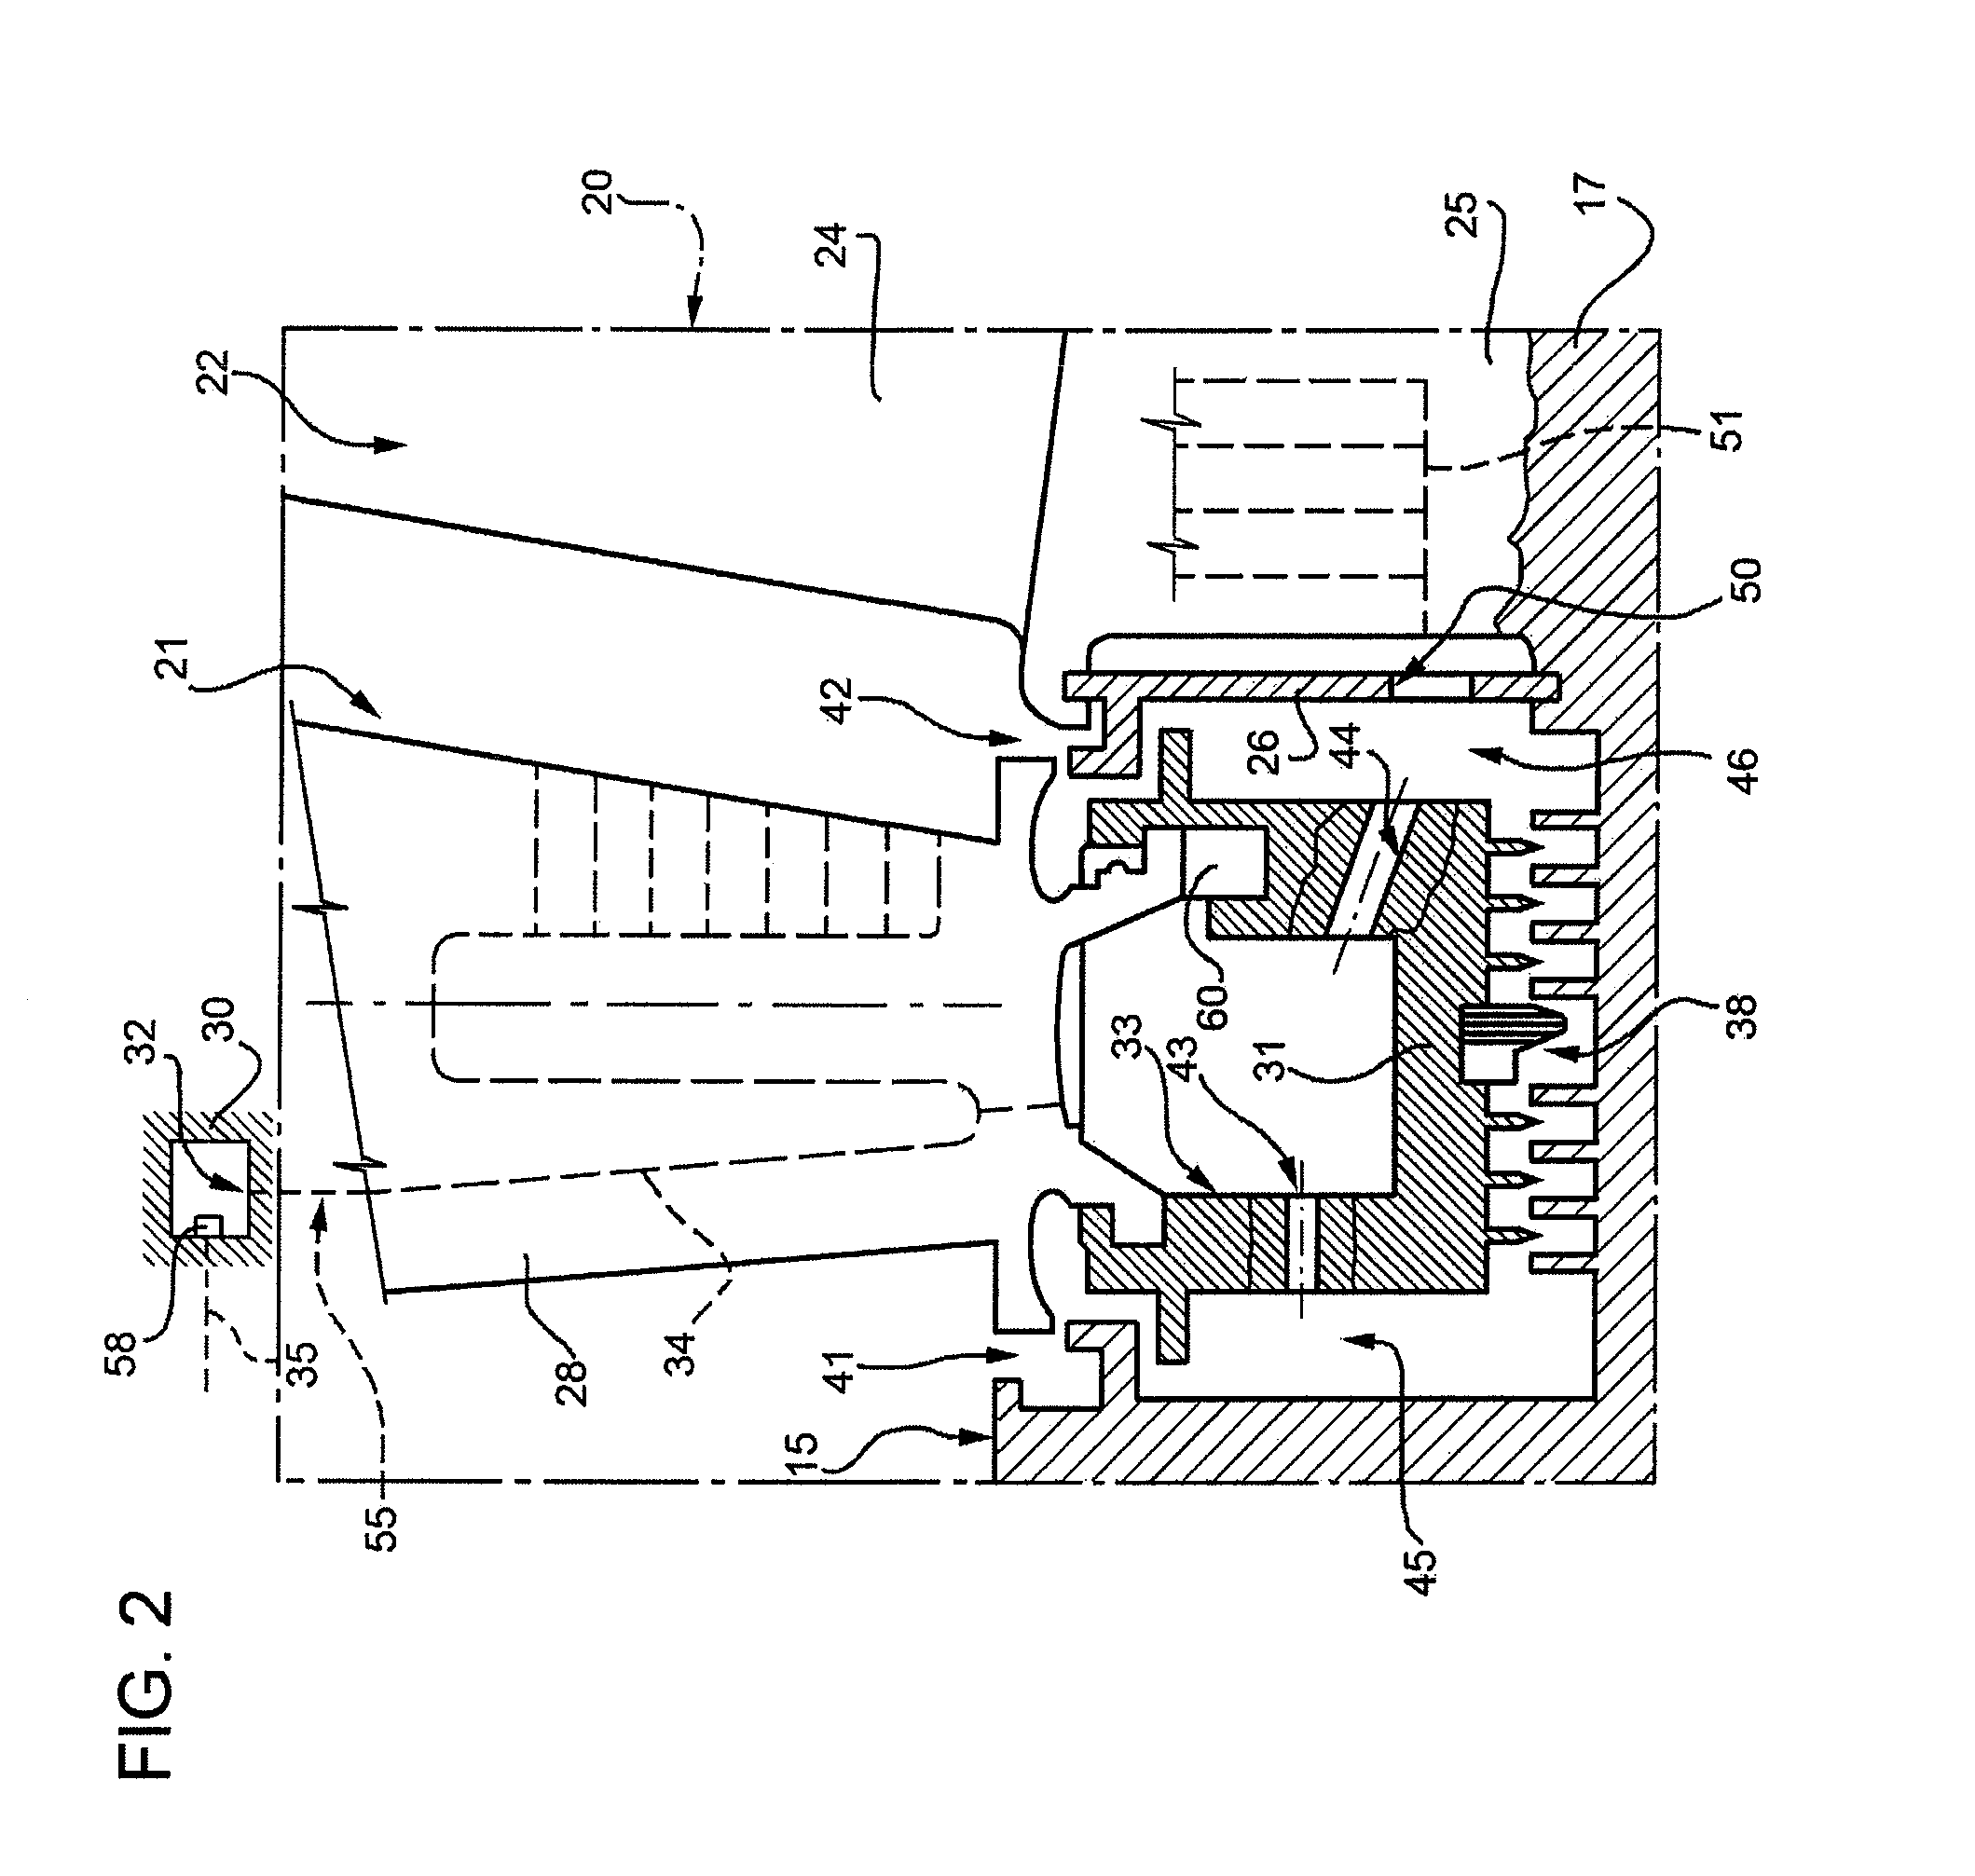 Control method for cooling a turbine stage in a gas turbine